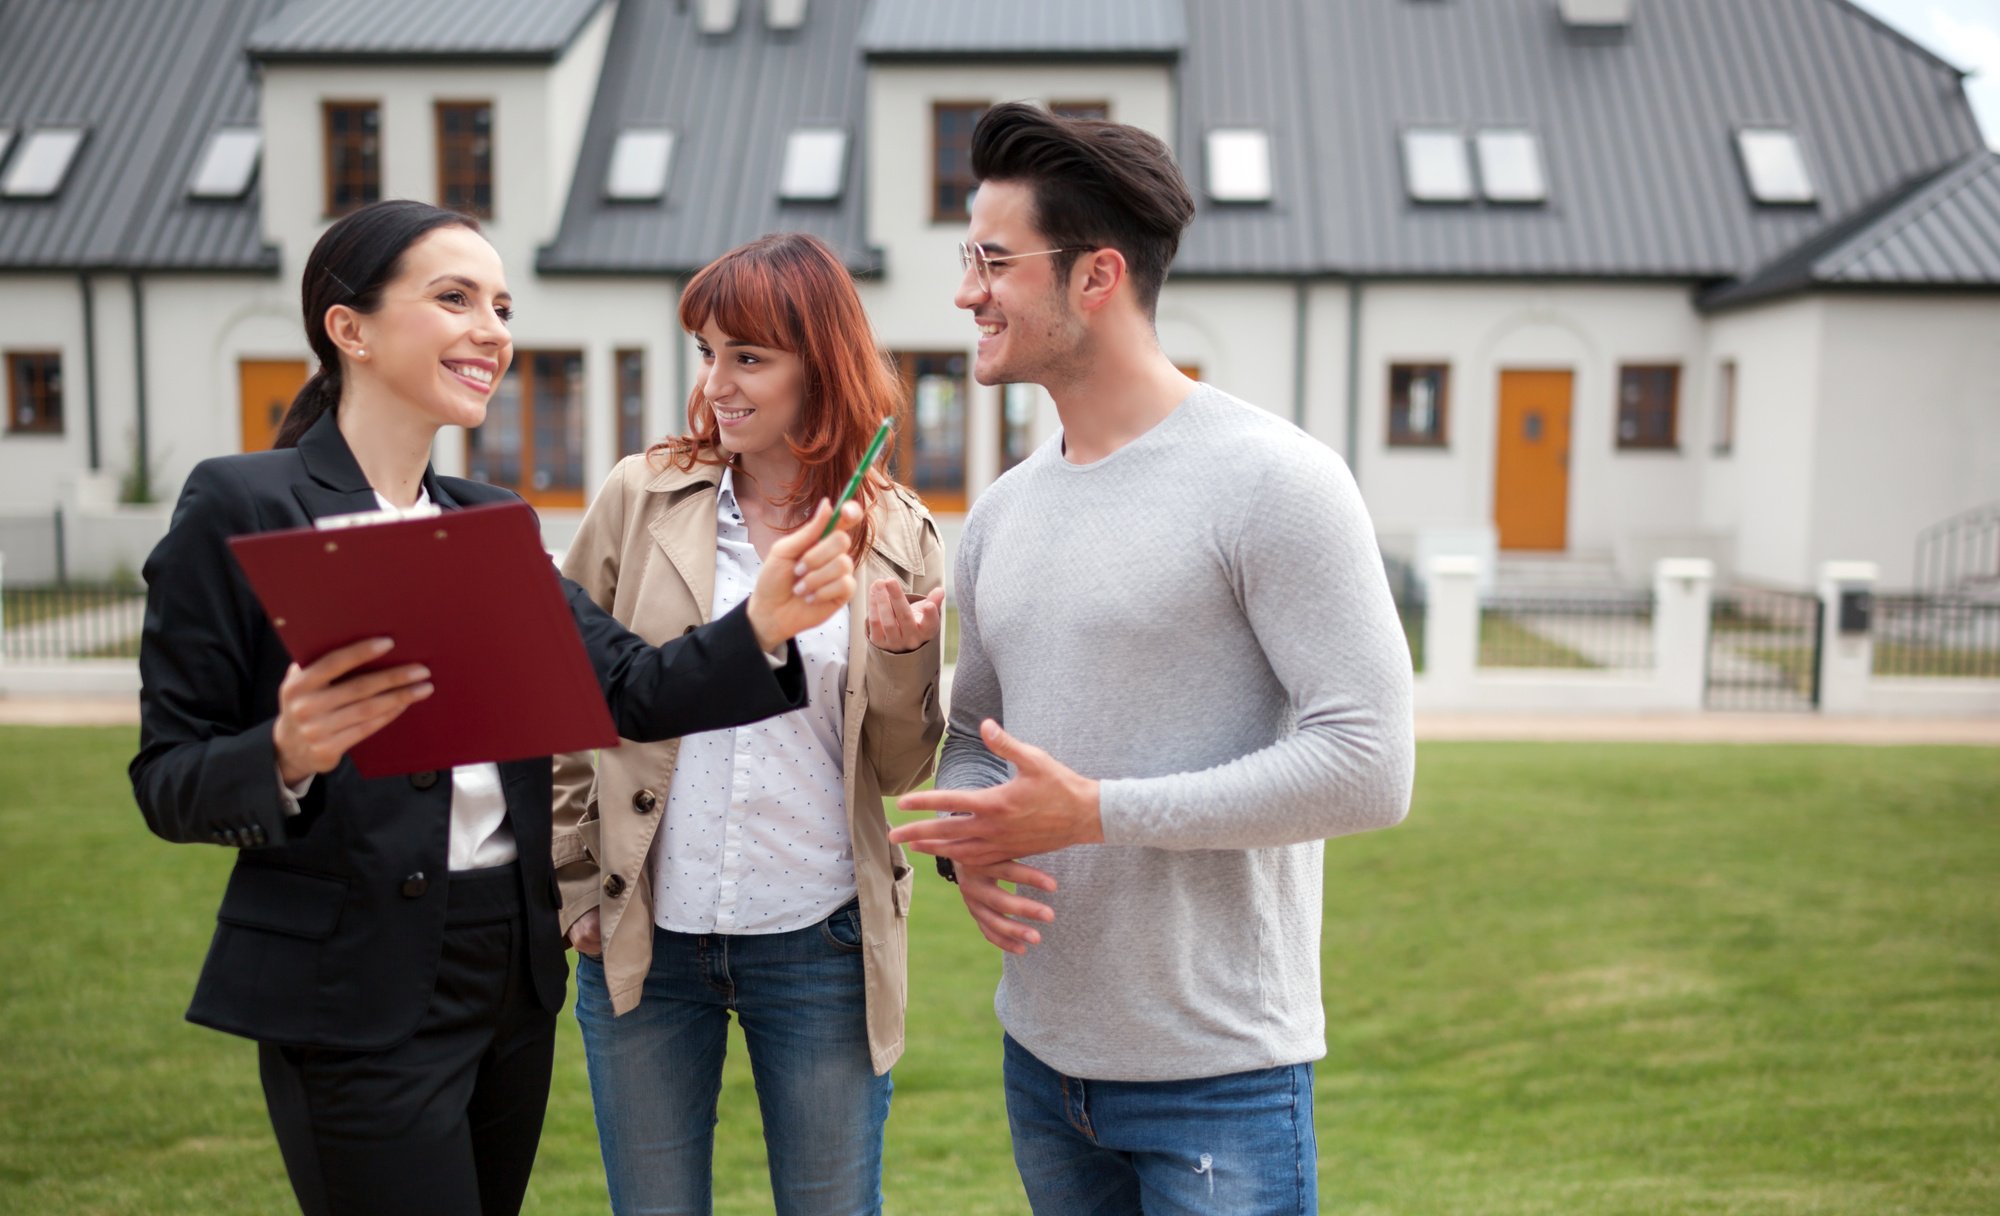 It is important to choose a reliable and professional real estate agent to handle your buying or selling needs. This is how to find the best real estate agent.